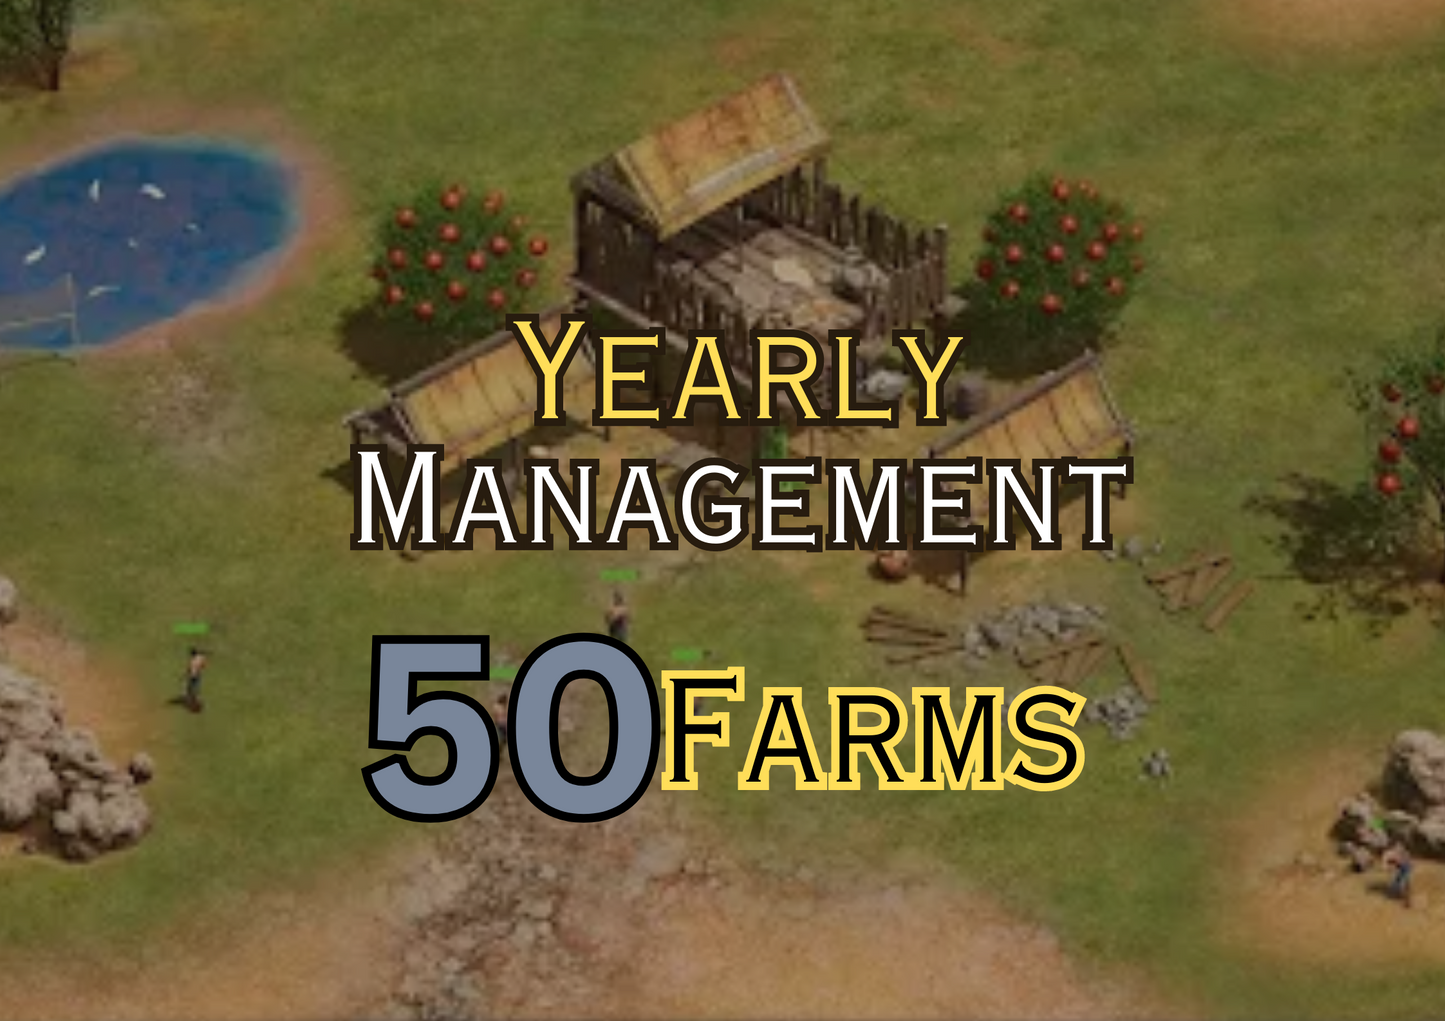 Yearly Management for 50 farms